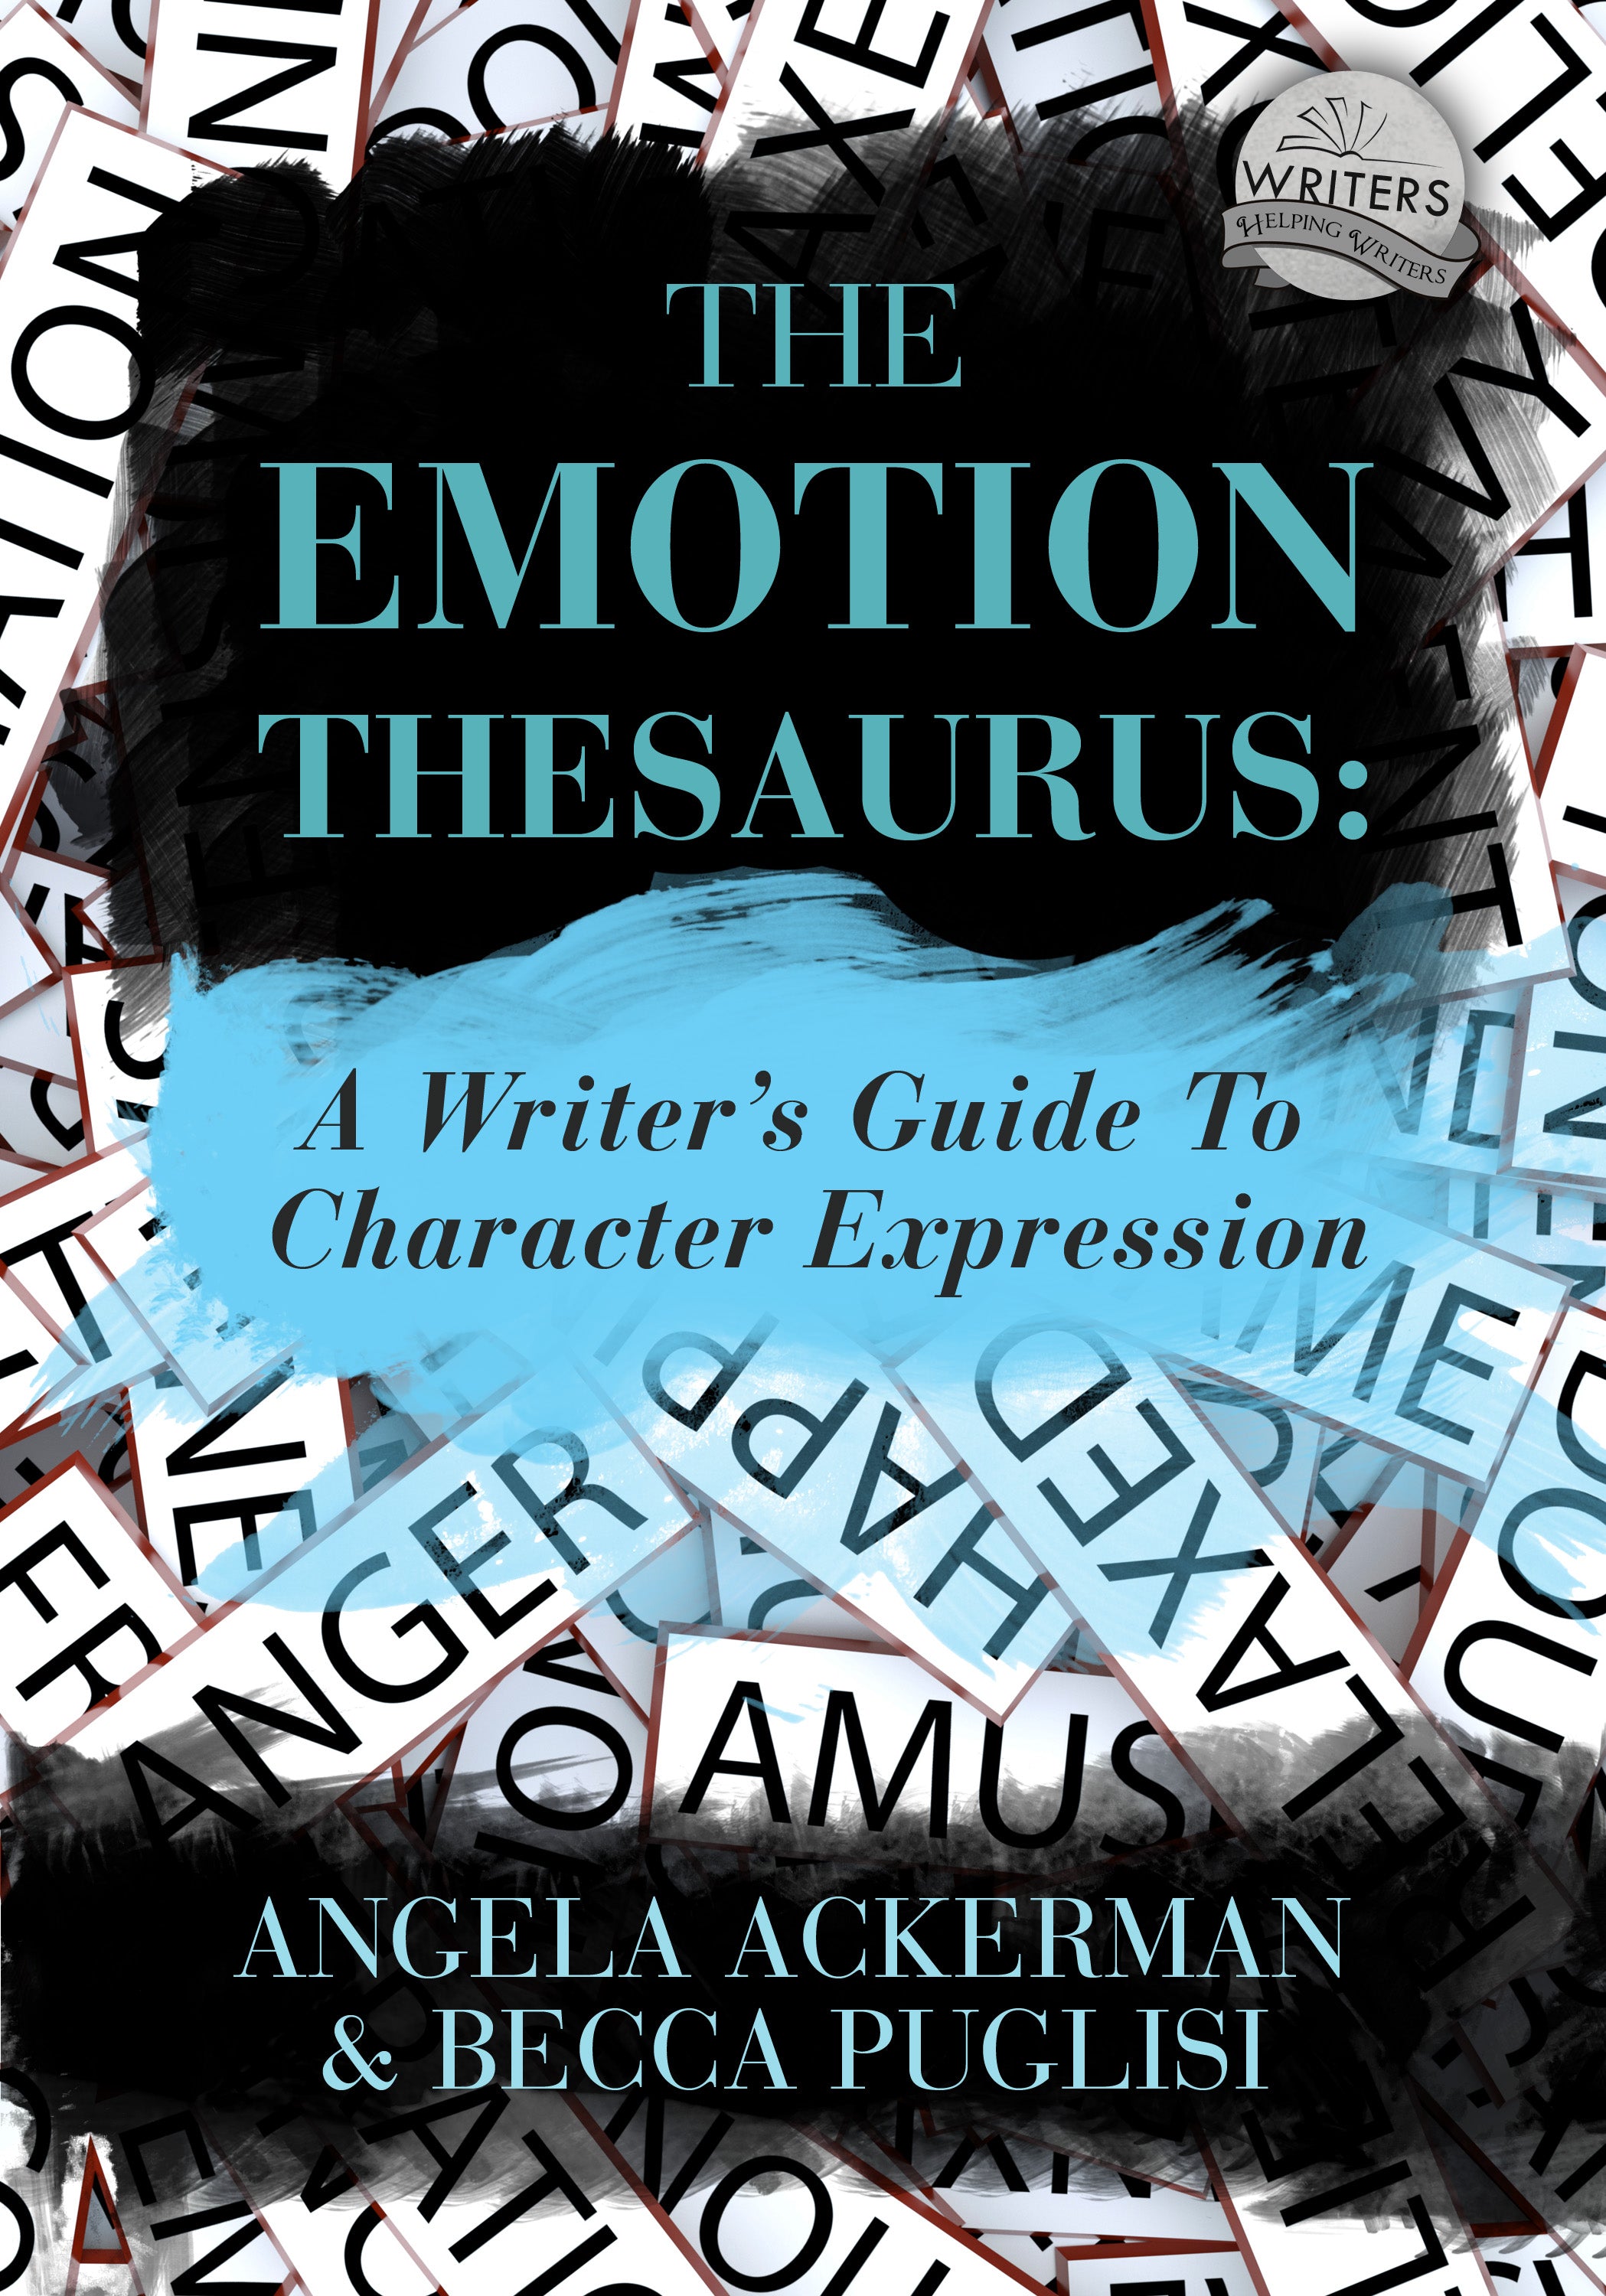 Awesome Resources for Creative Writing: Emotion Thesaurus